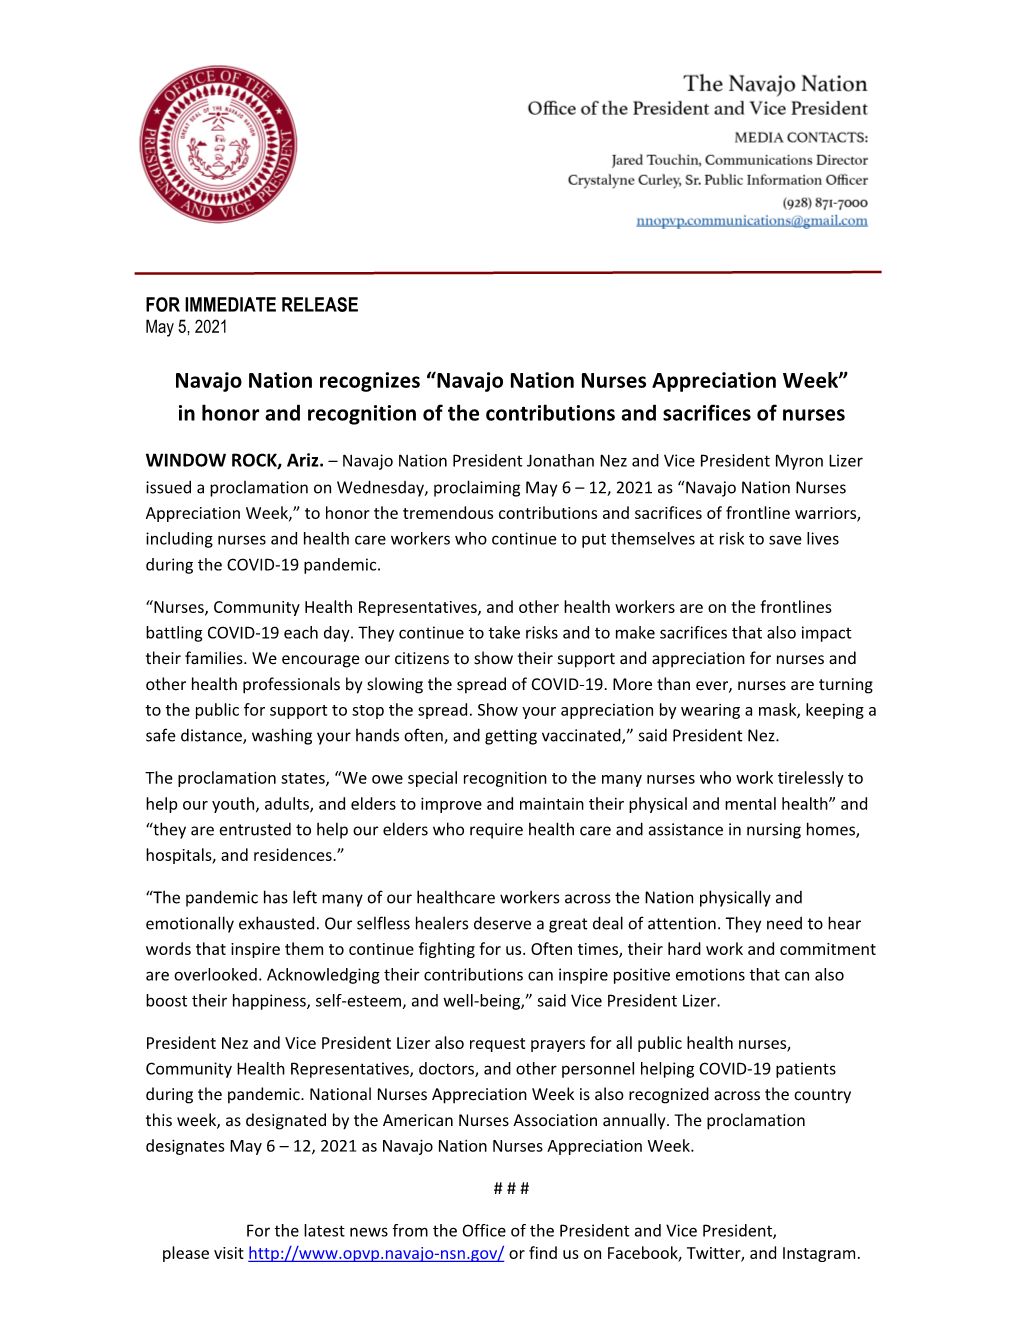 Navajo Nation Recognizes “Navajo Nation Nurses Appreciation Week” in Honor and Recognition of the Contributions and Sacrifices of Nurses